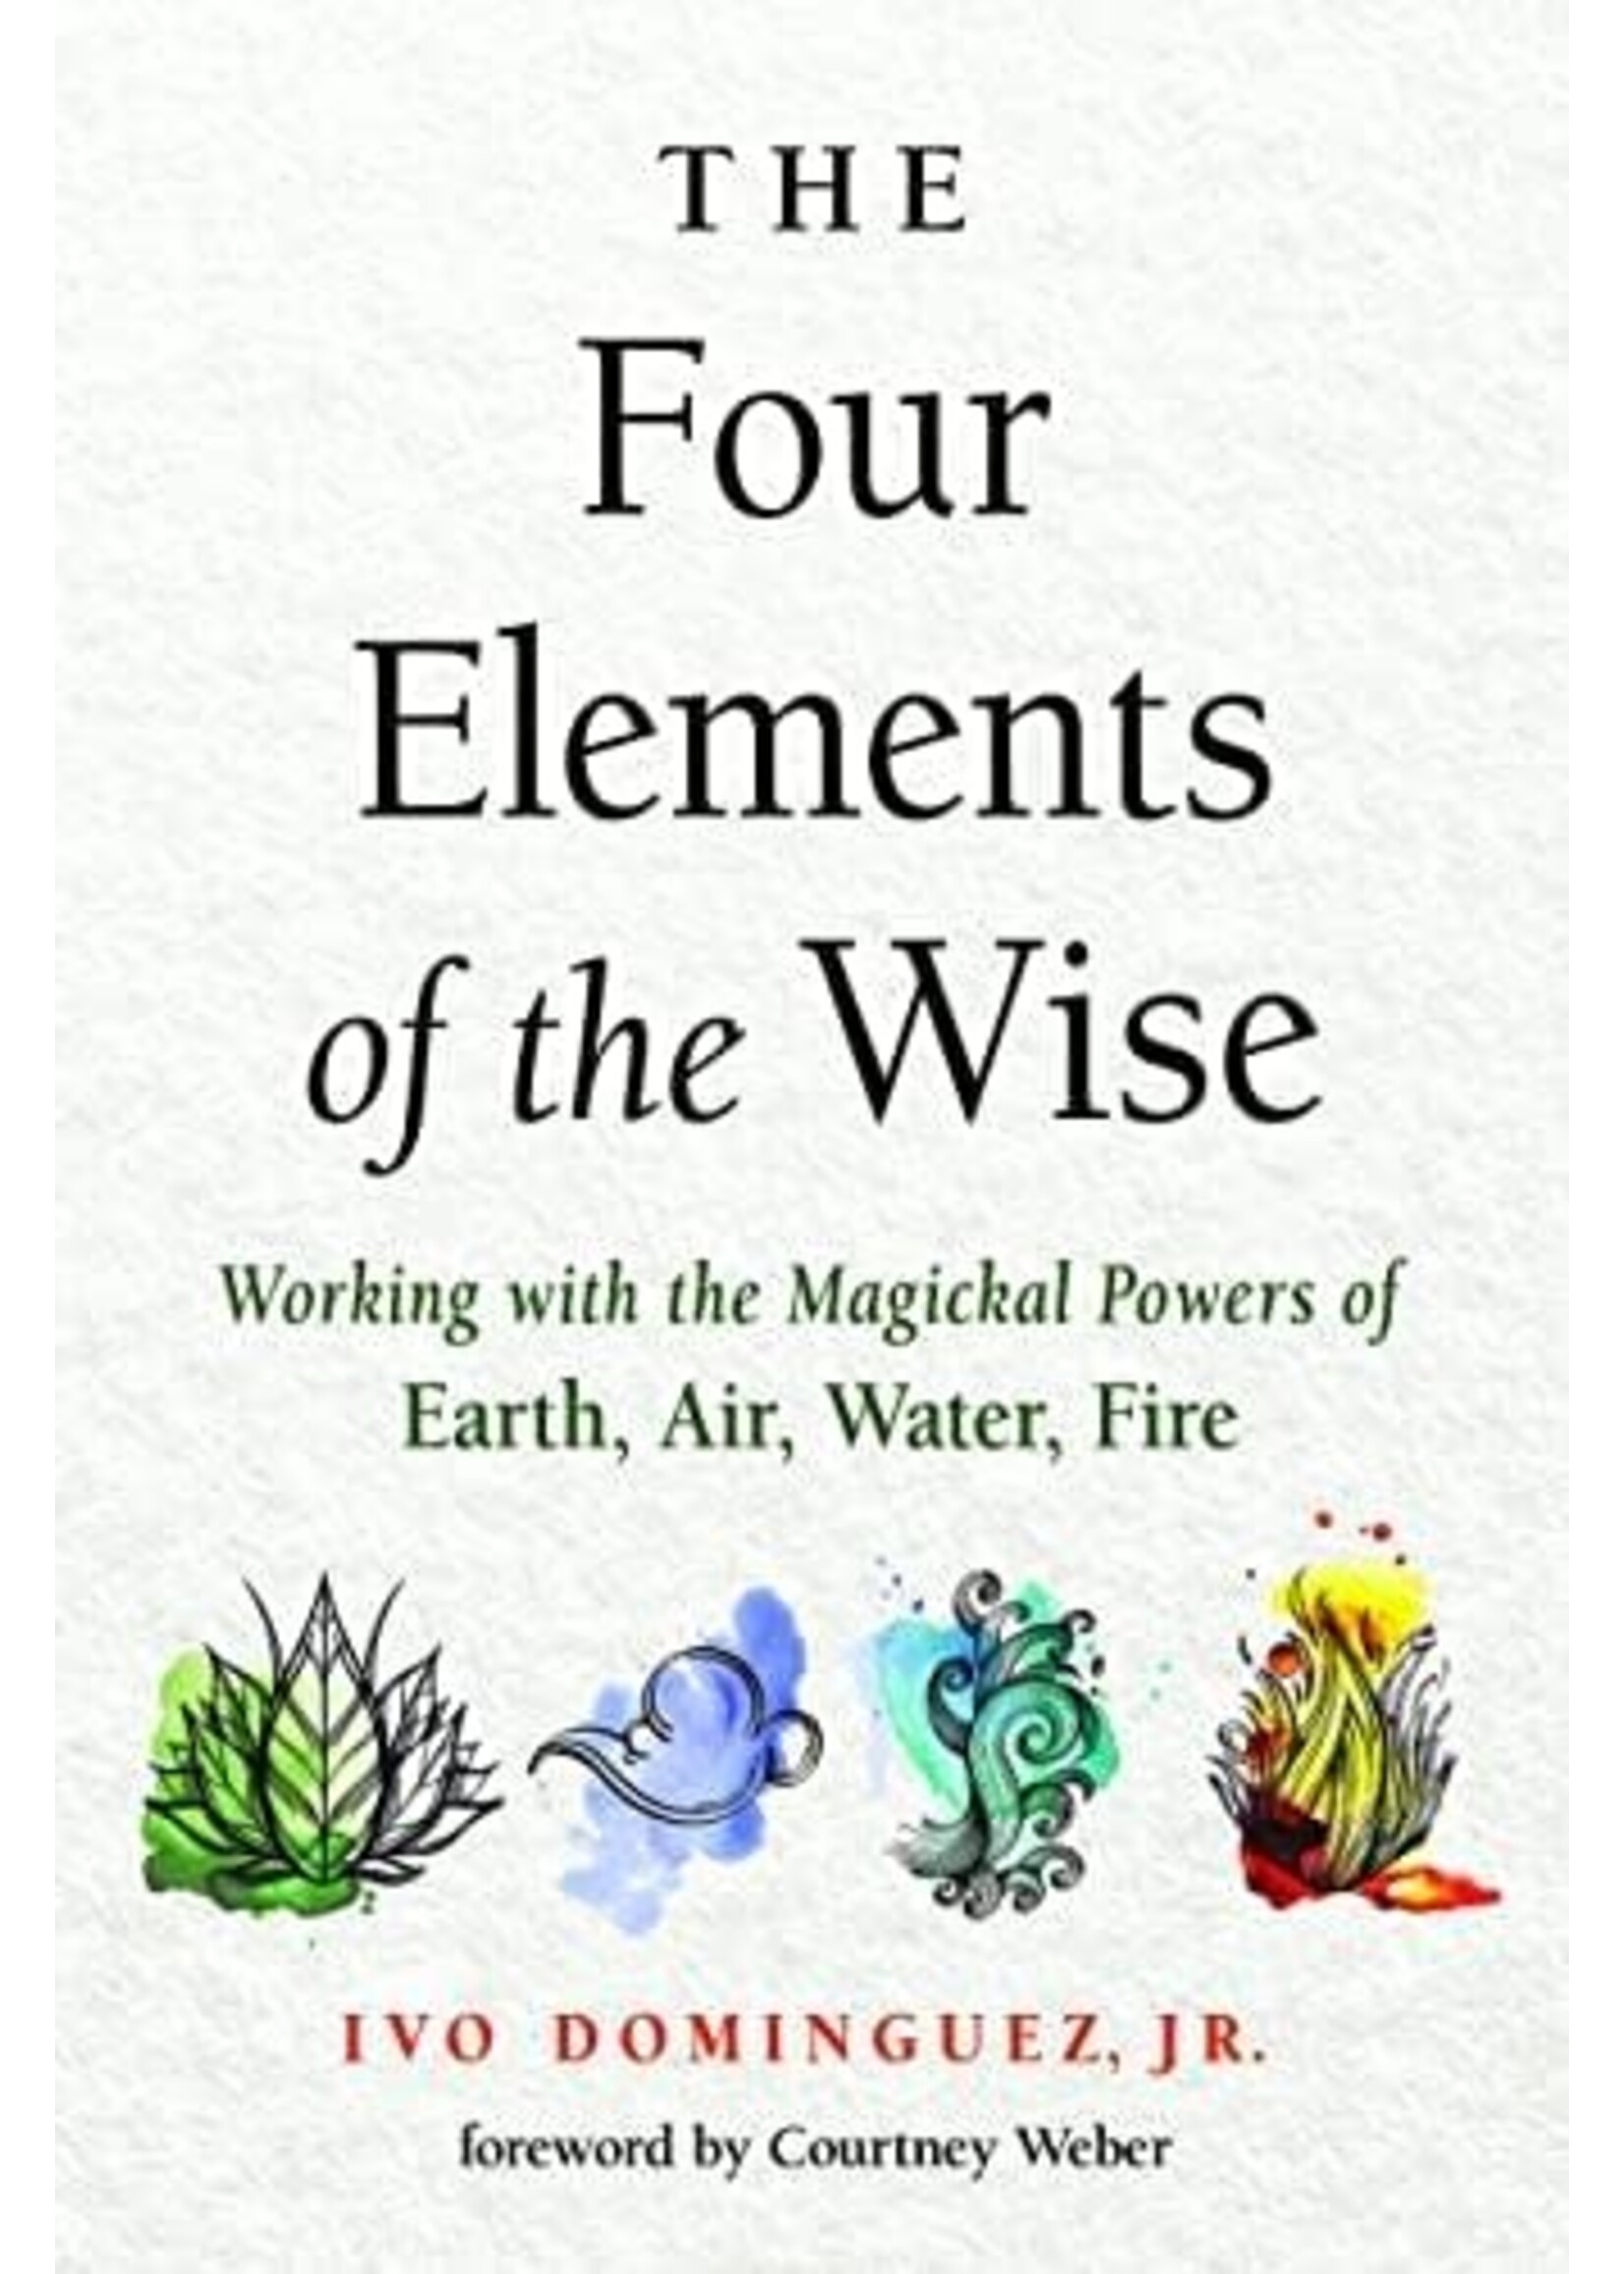 The Four Elements of the Wise by Ivo Dominguez Jr.